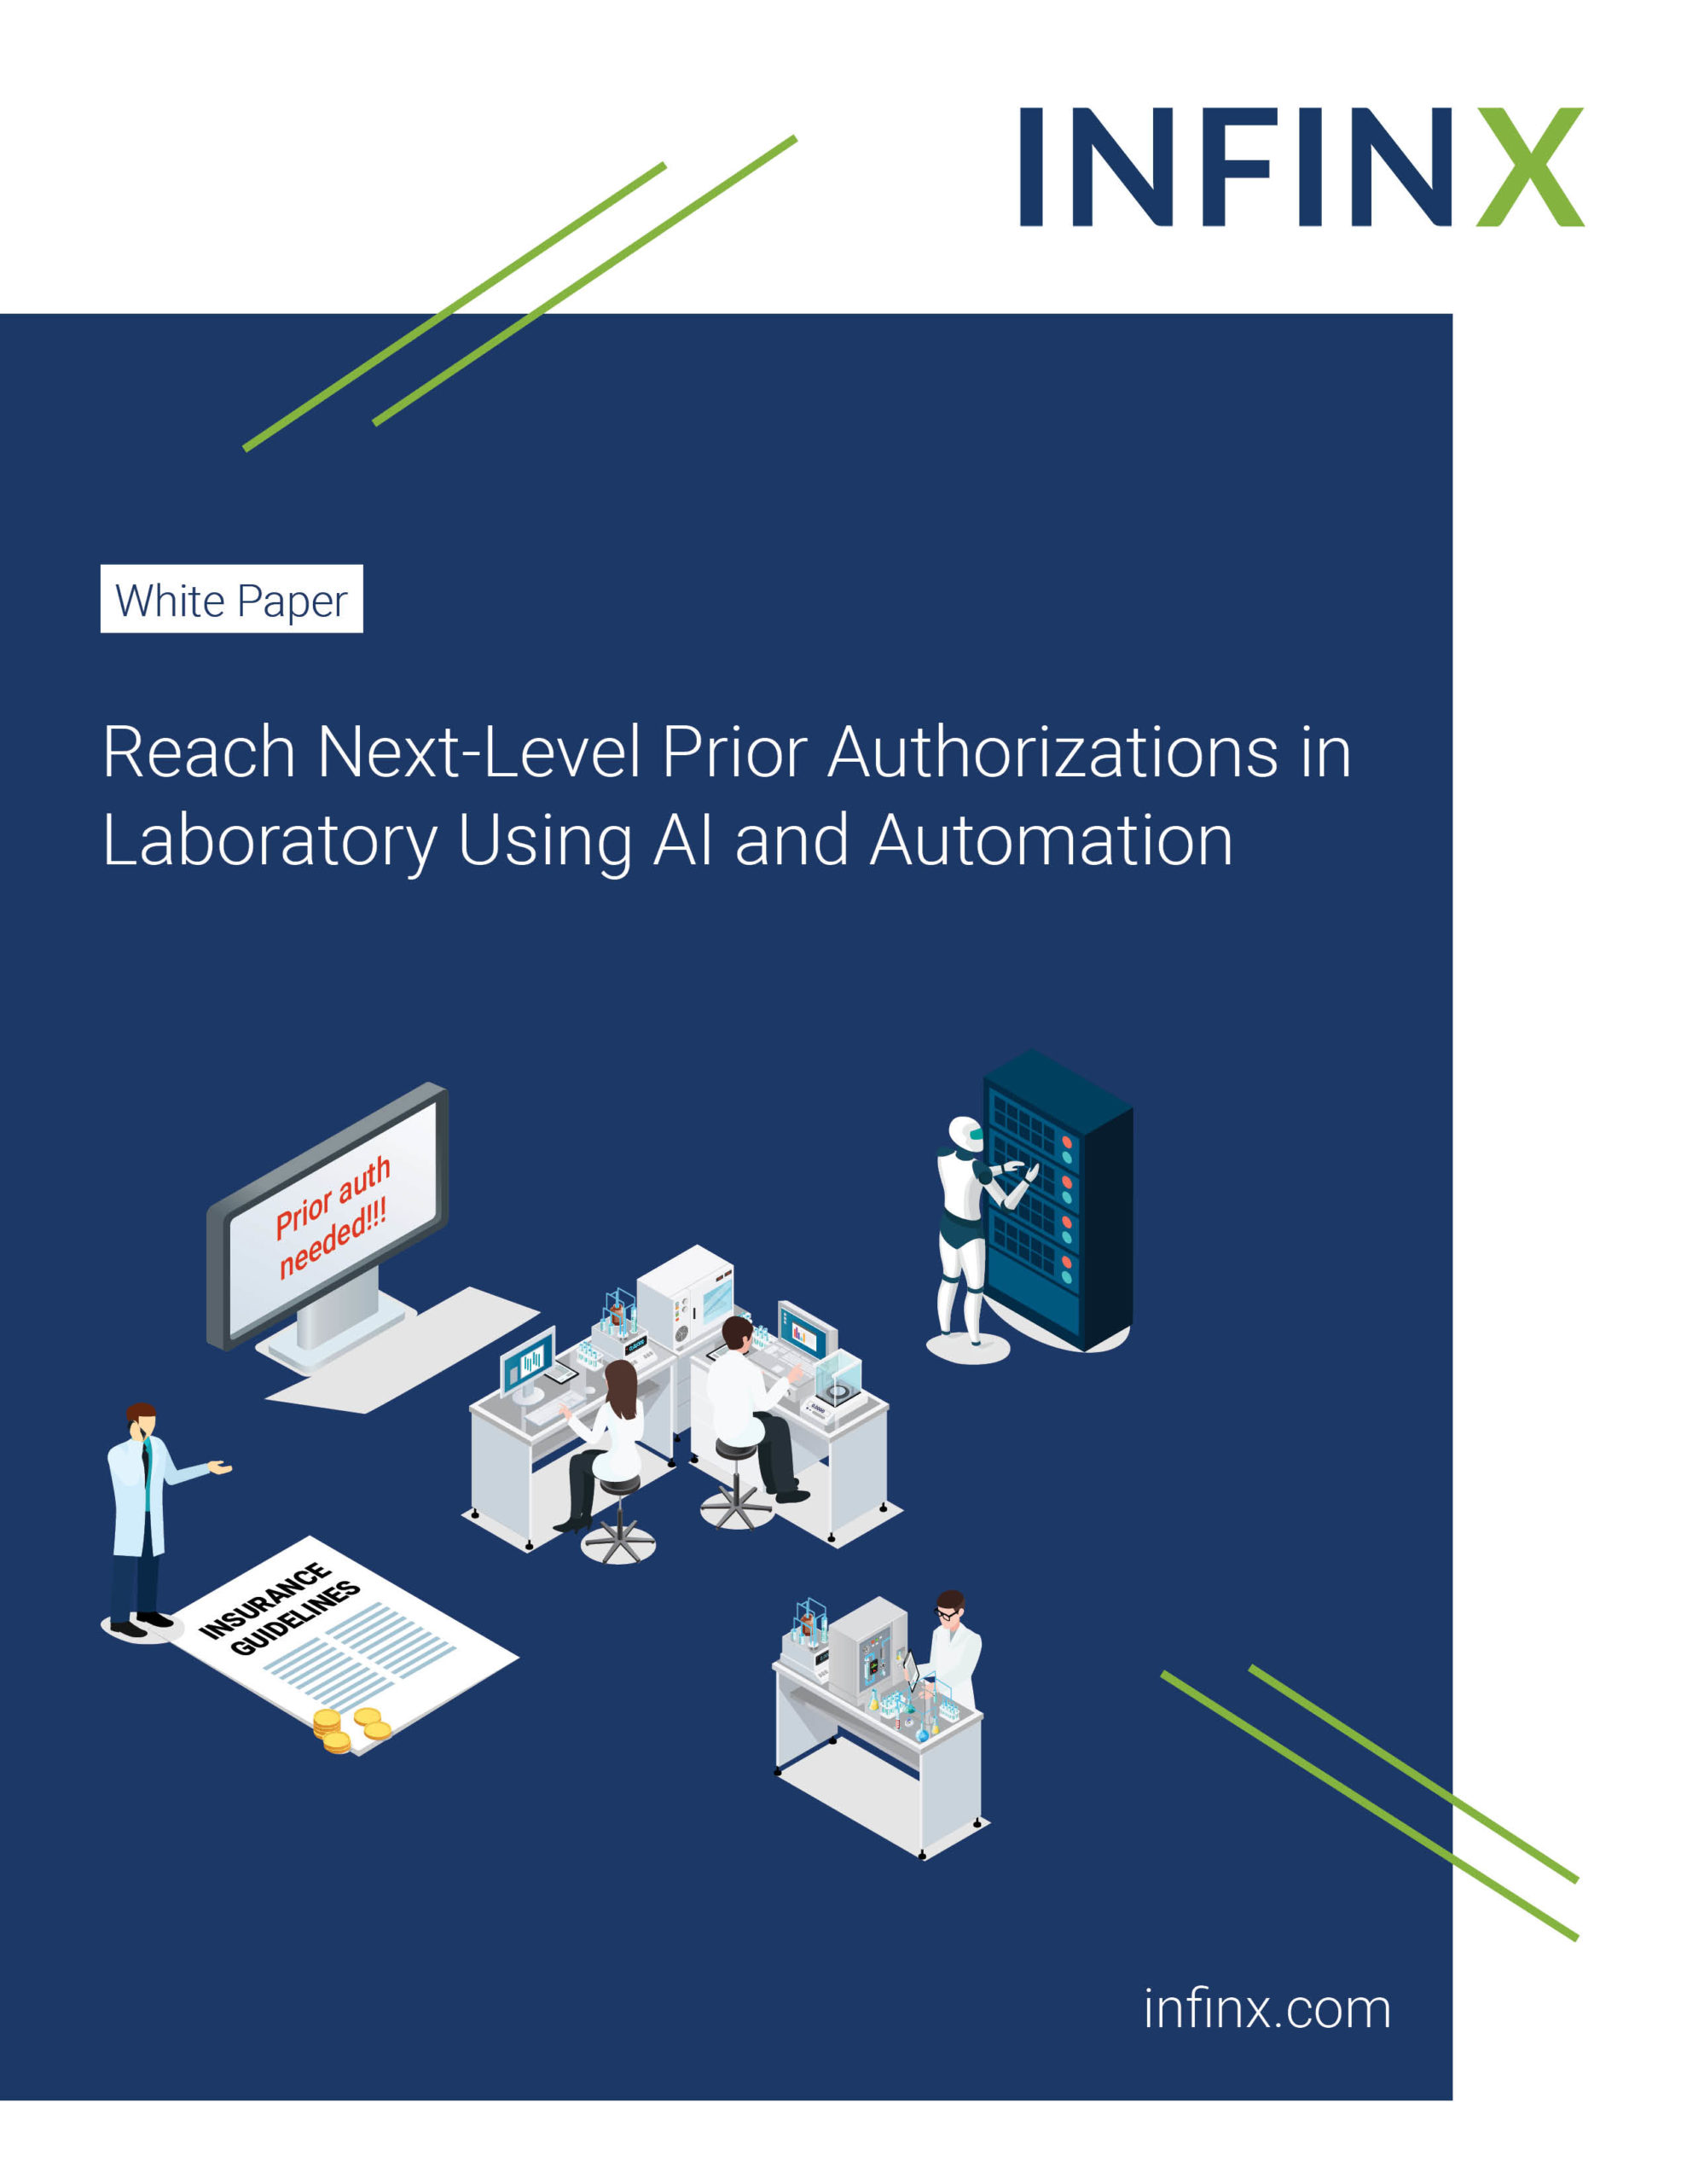 Infinx - White Paper - Reach Next-Level Prior Authorizations in Laboratory Using AI and Automation June2021 1